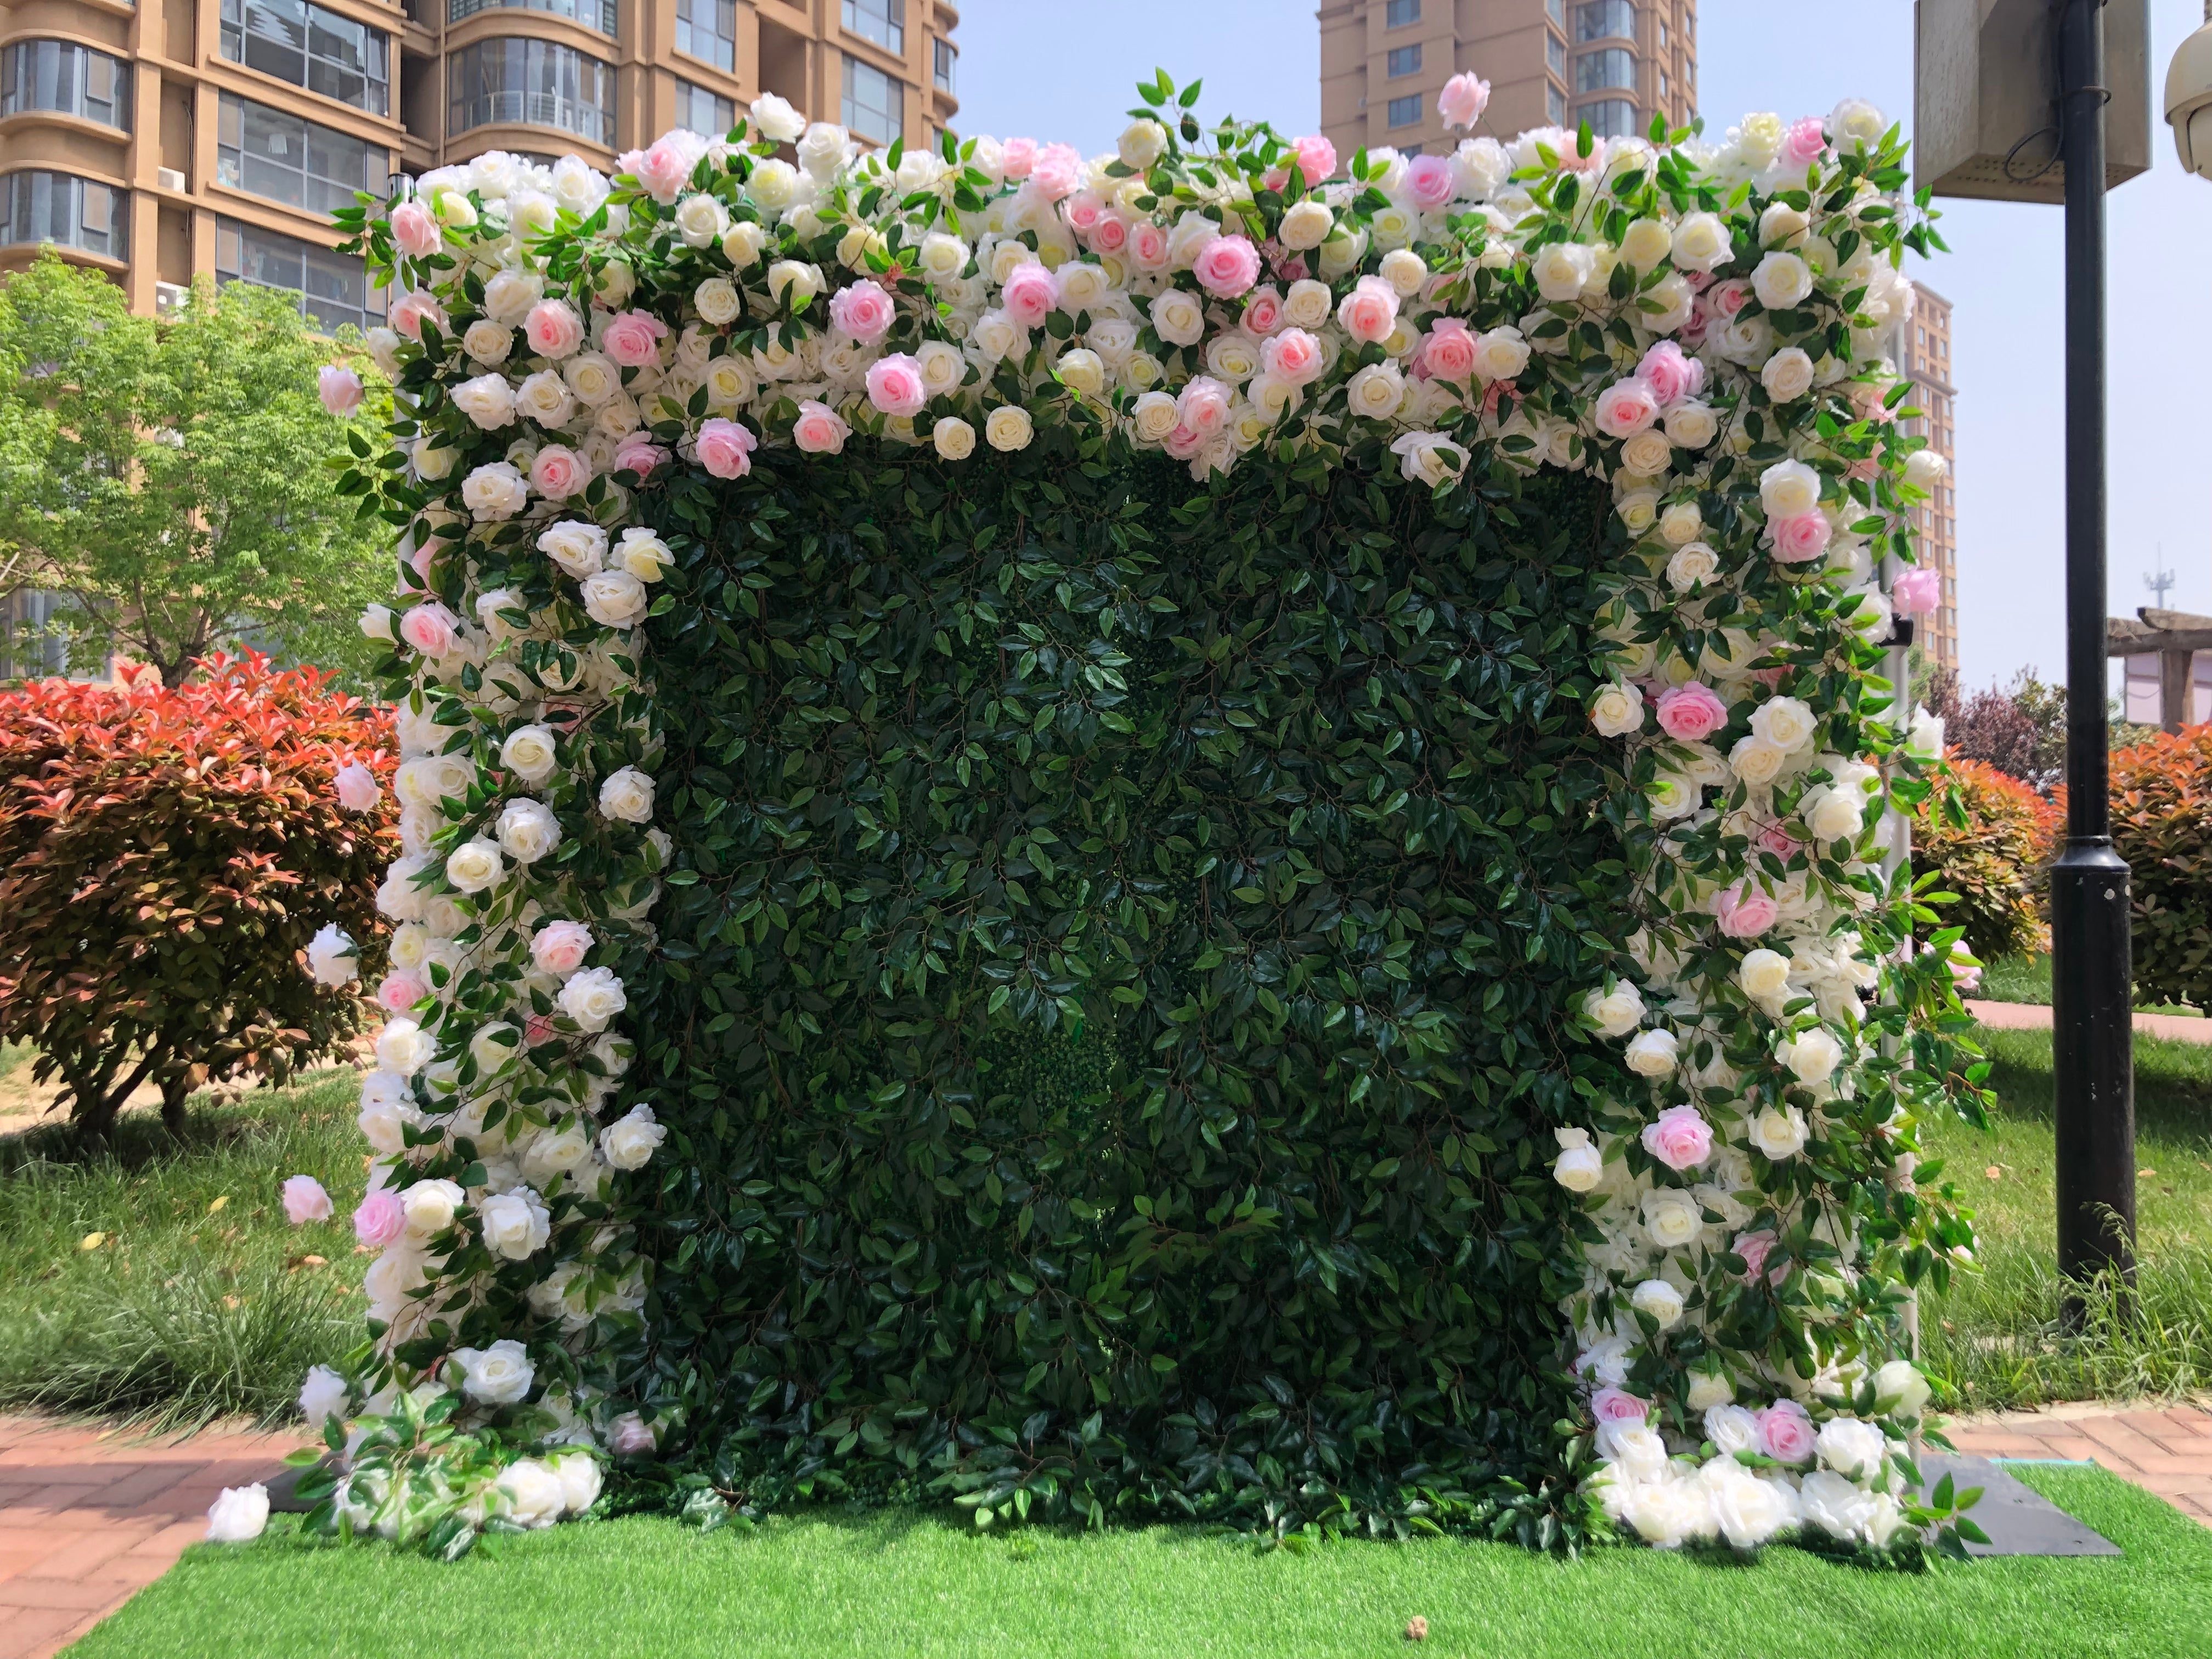 The pink white peony green leaves fabric flower wall looks full of life. 